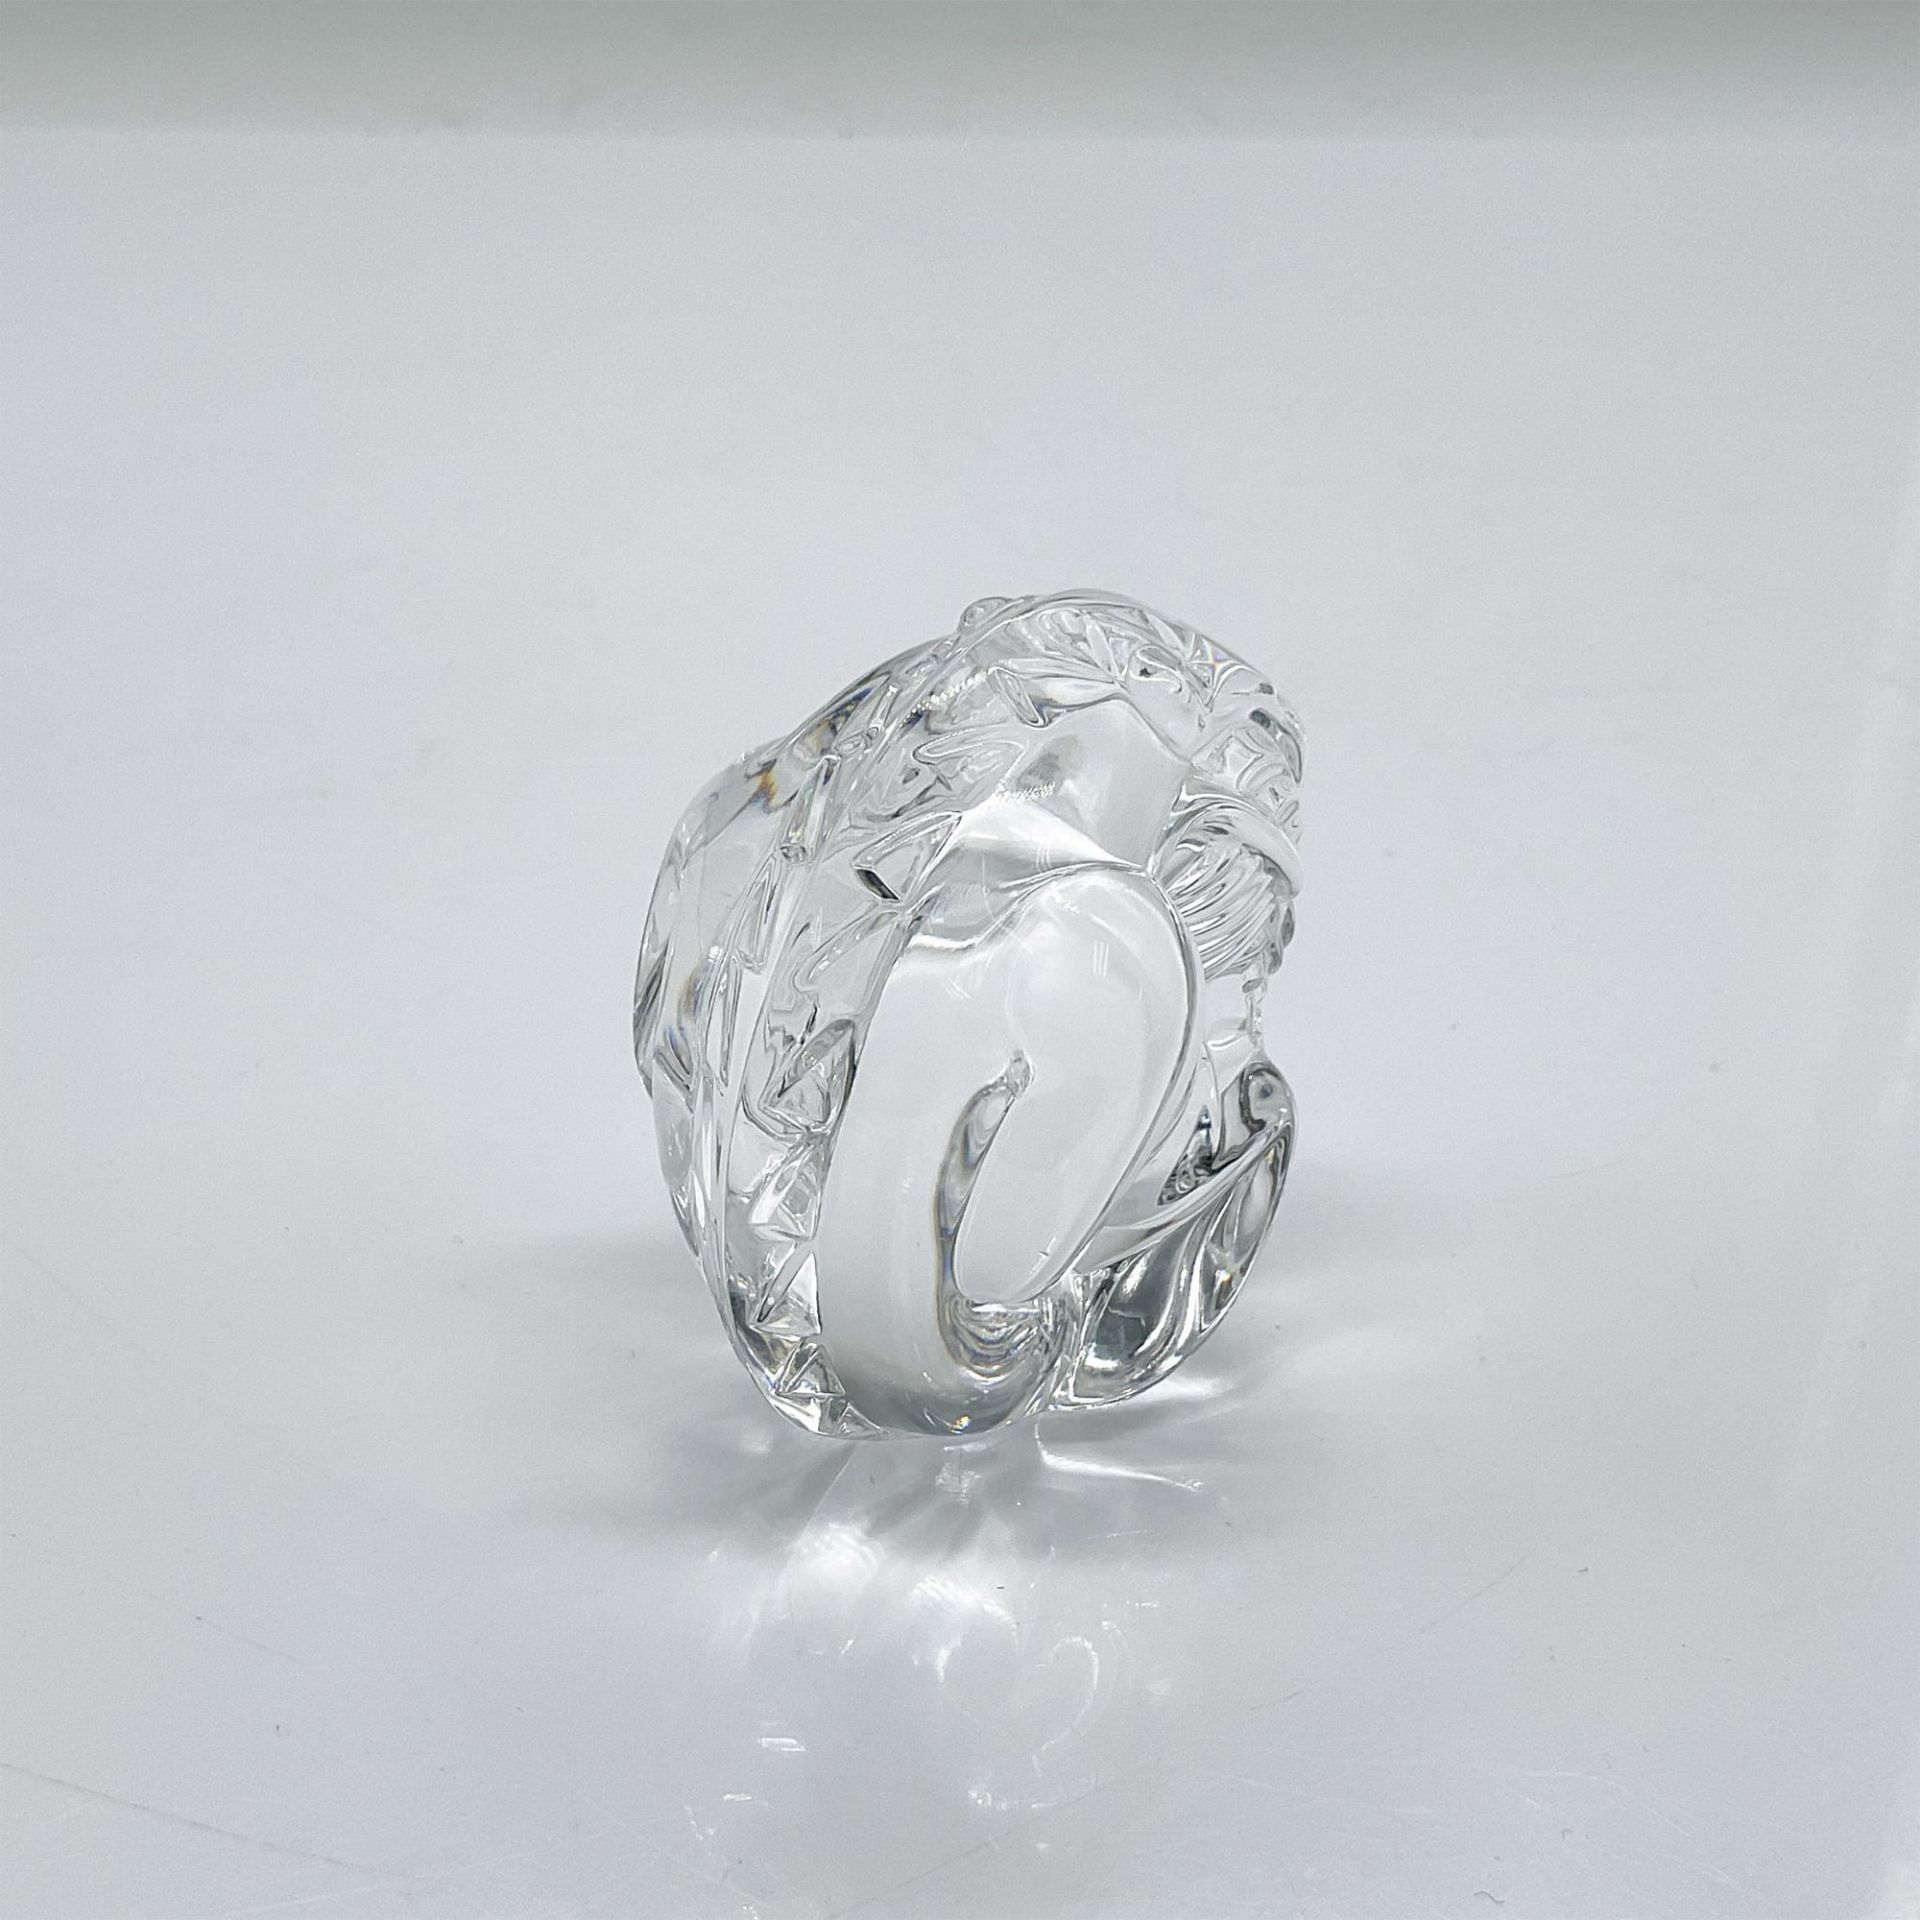 Steuben Glass Ouroboros Dragon Hand Cooler, Paperweight - Image 2 of 3